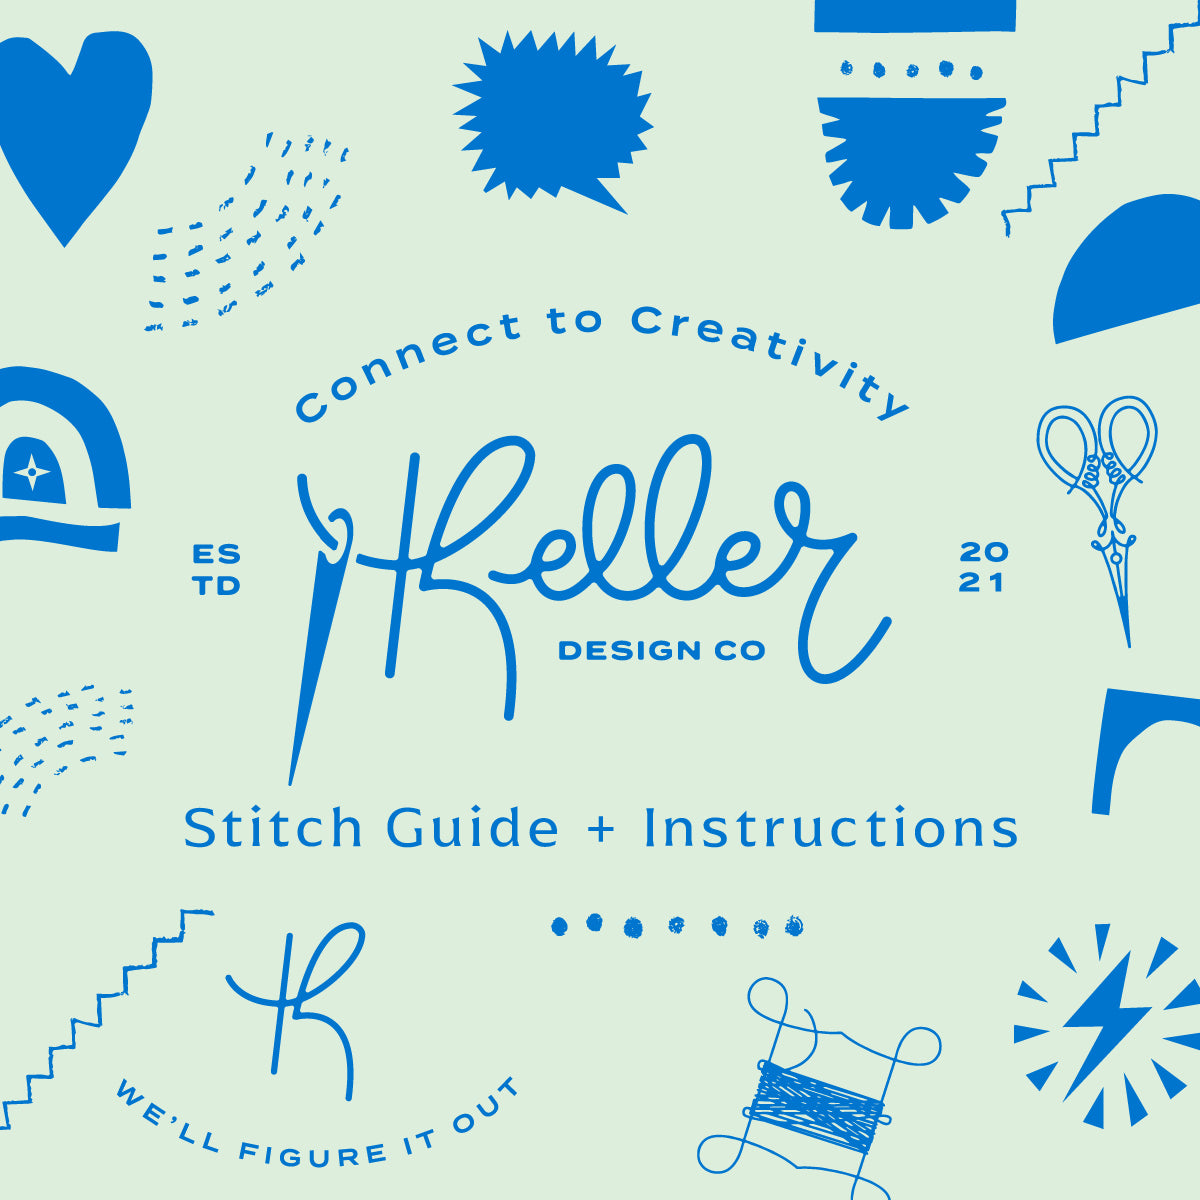 Keller Design Co Stitch Guide and Instructions. Learn 12 stitches! Connect to Creativity